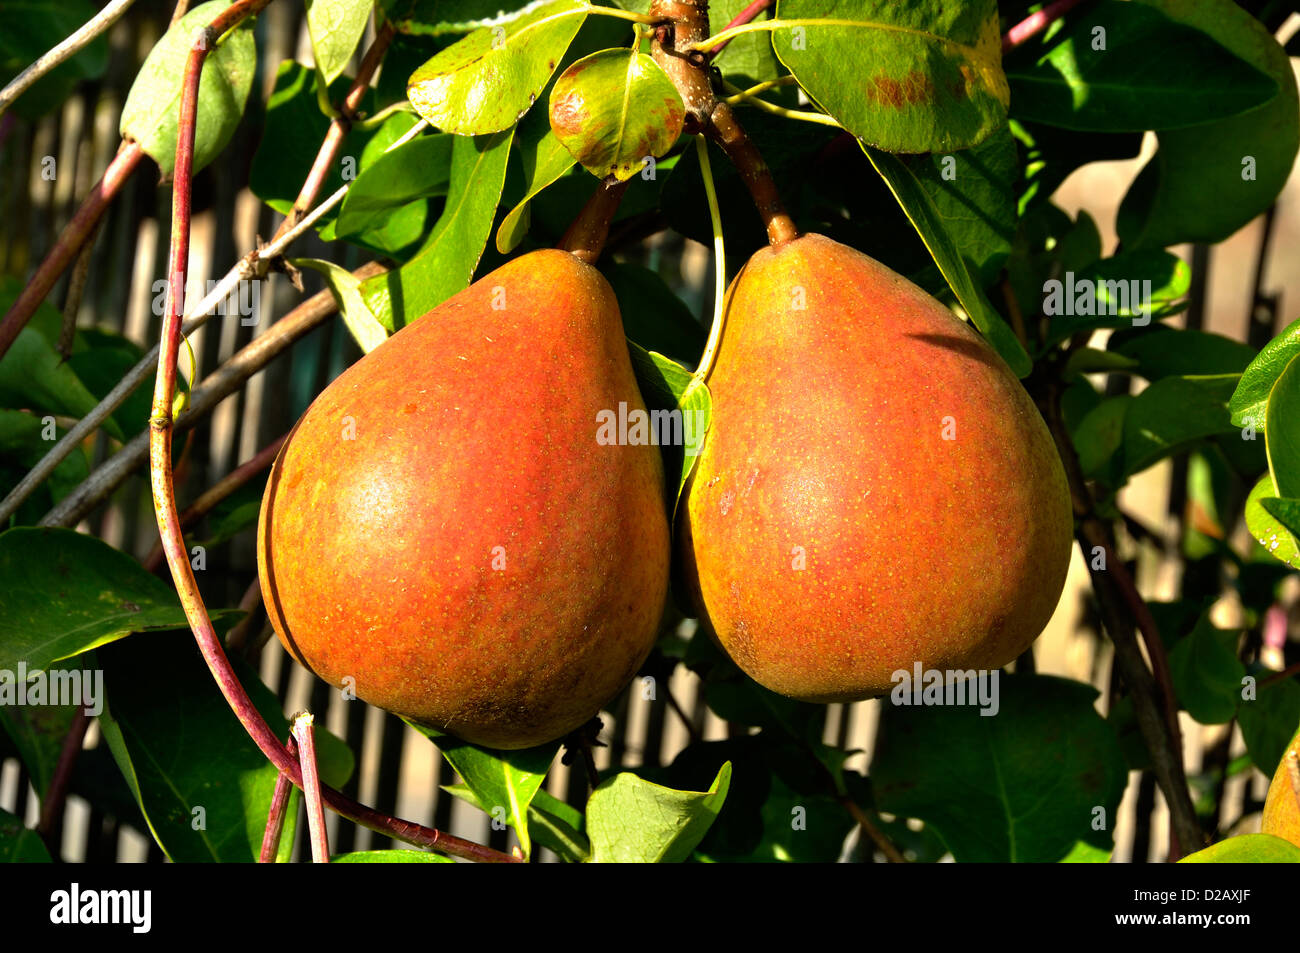 Pears on the branch (Pyrus communis), variety : 'Beurre Hardy', august, ripening in the tree . Stock Photo